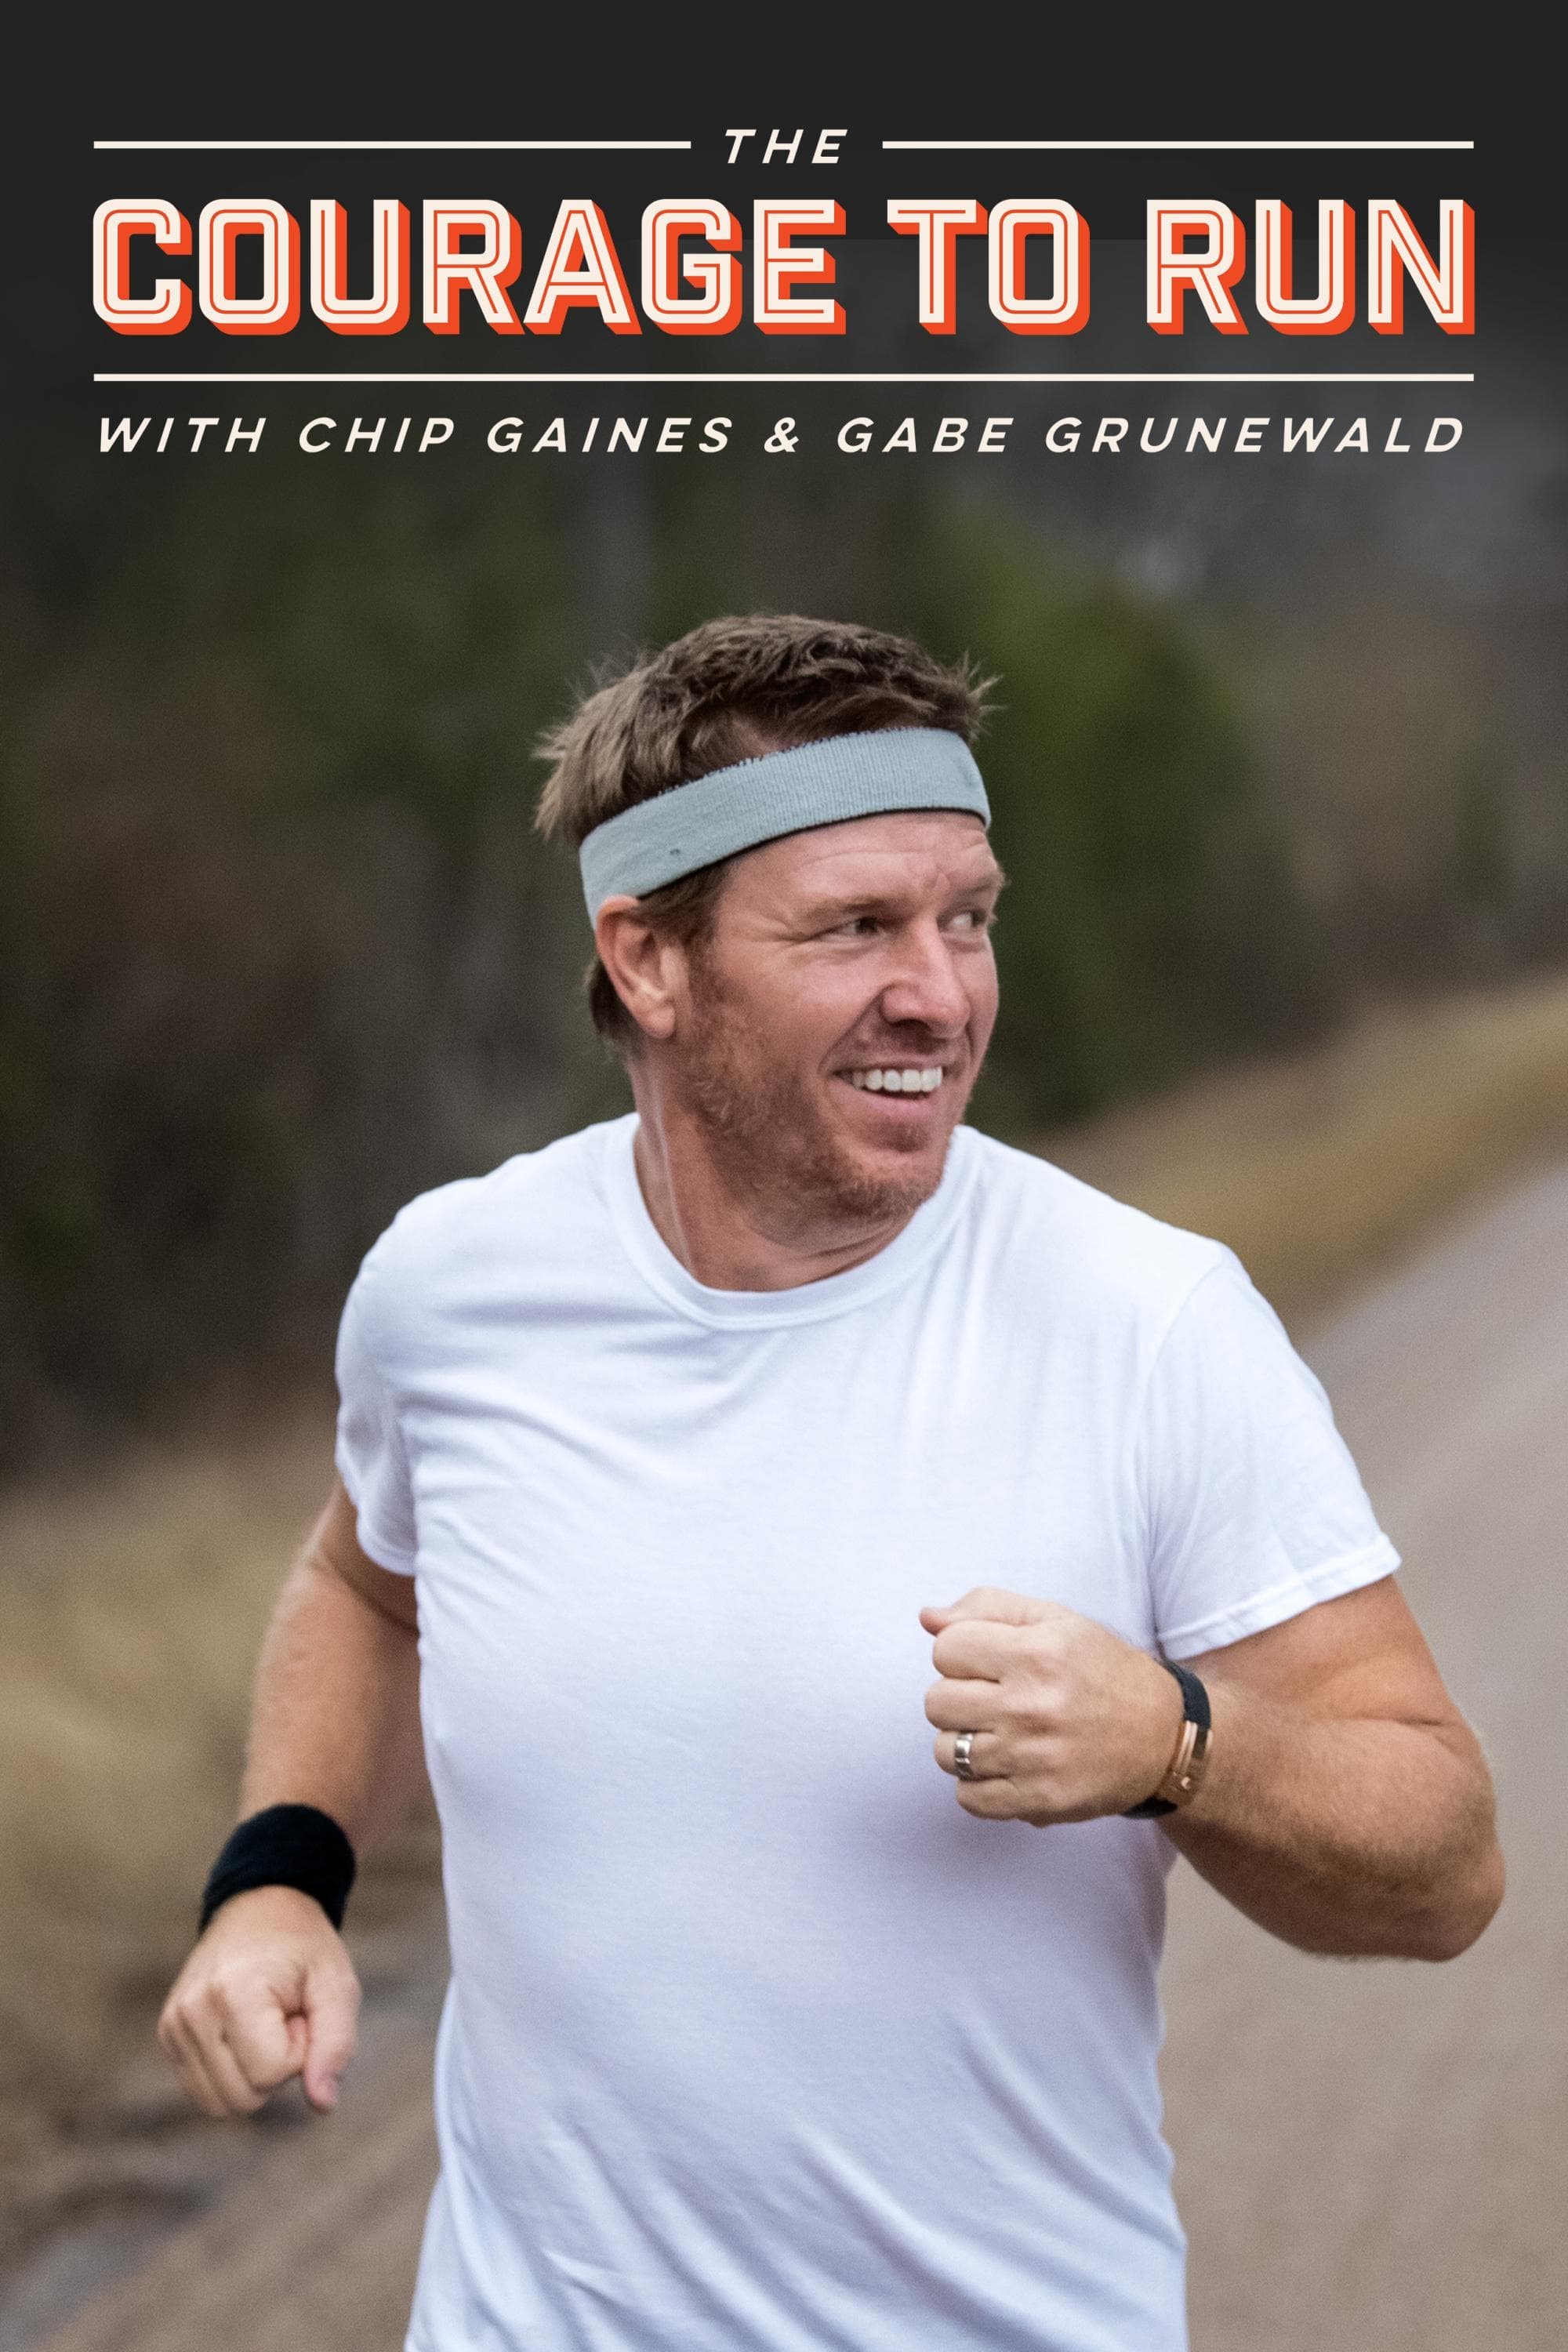 The Courage to Run with Chip Gaines & Gabe Grunewald